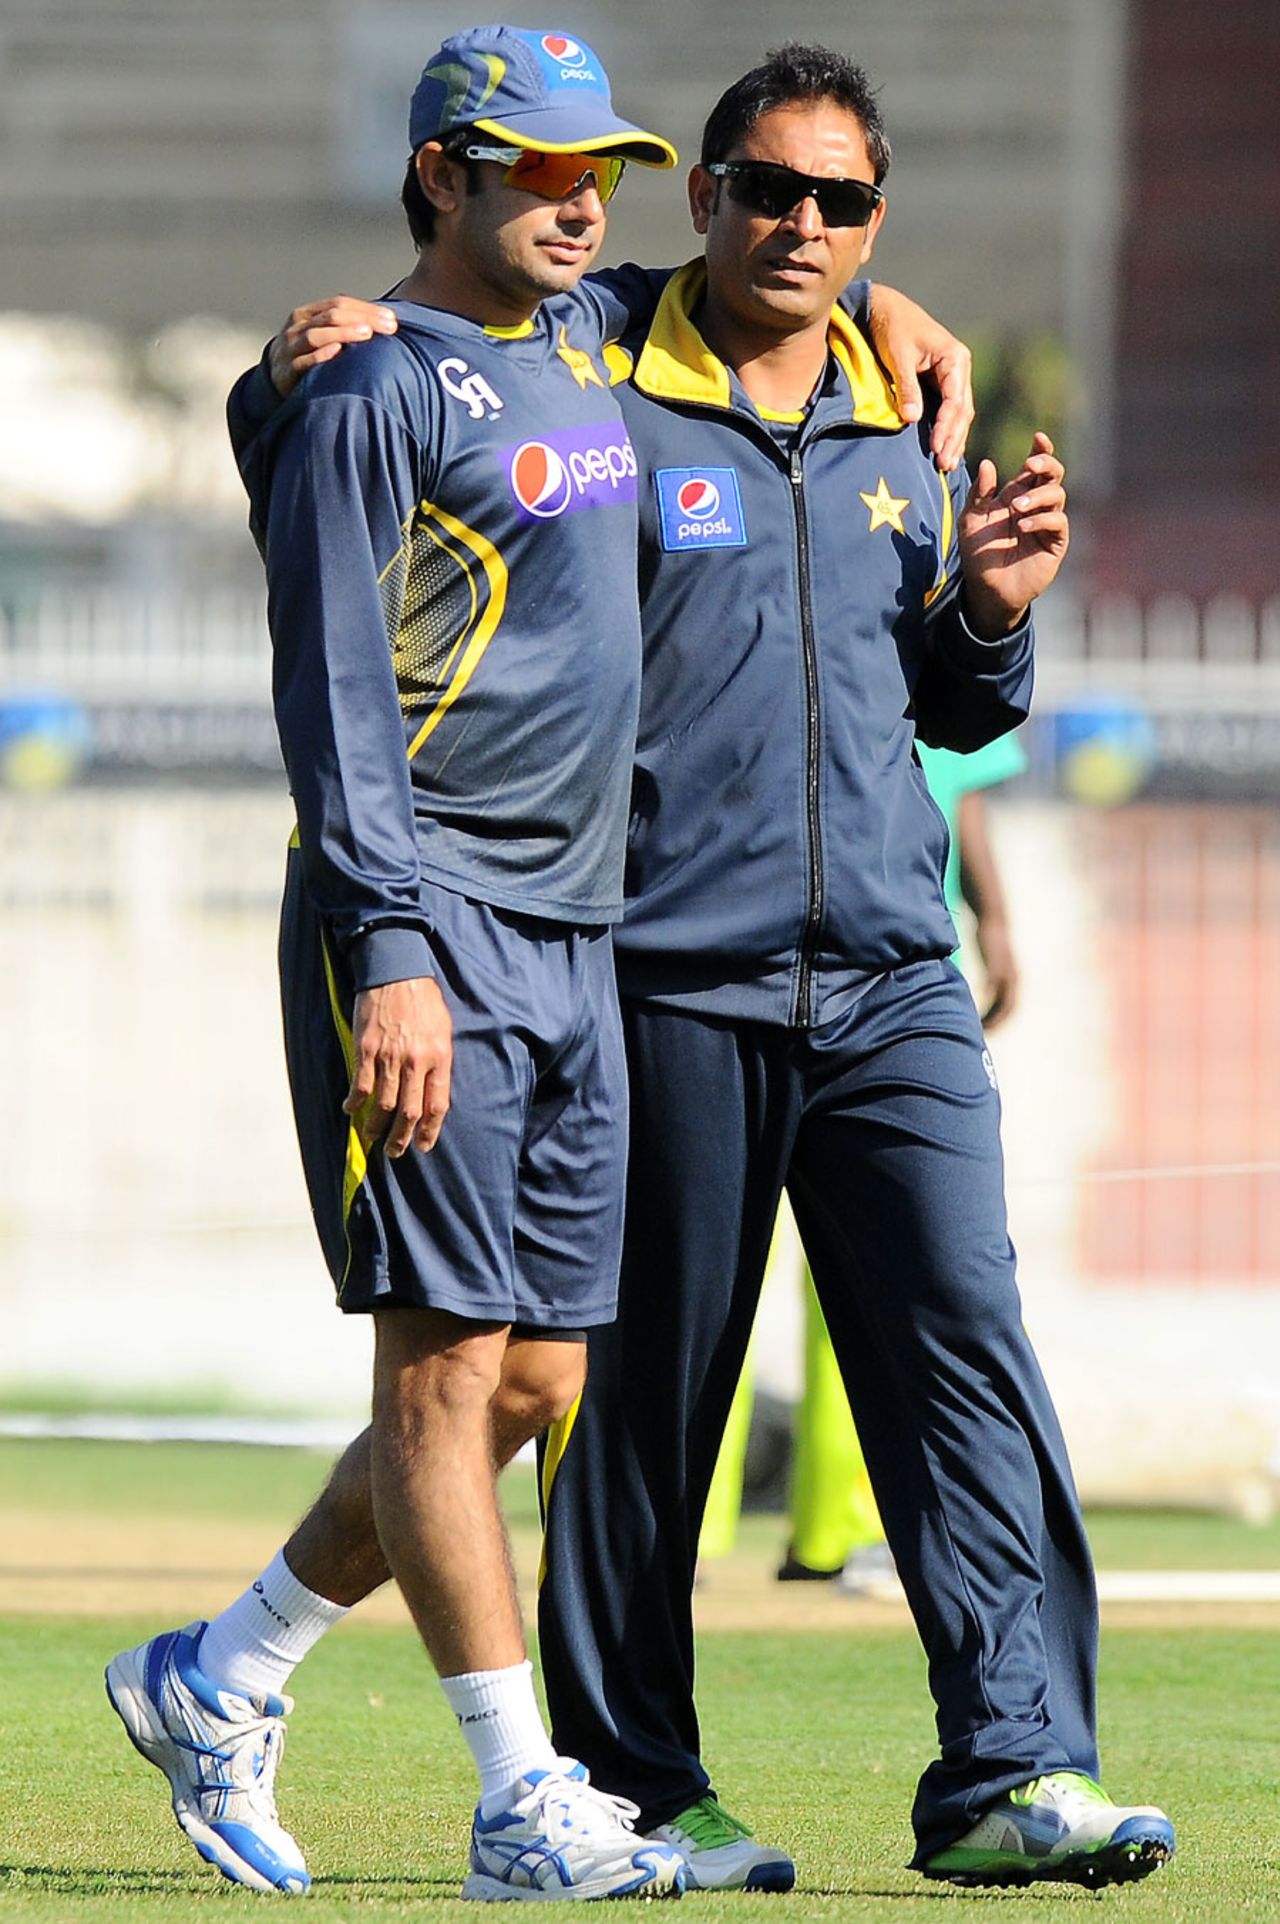 Saeed Ajmal and Abdur Rehman have a stroll at practice, Sharjah, January 15, 2014